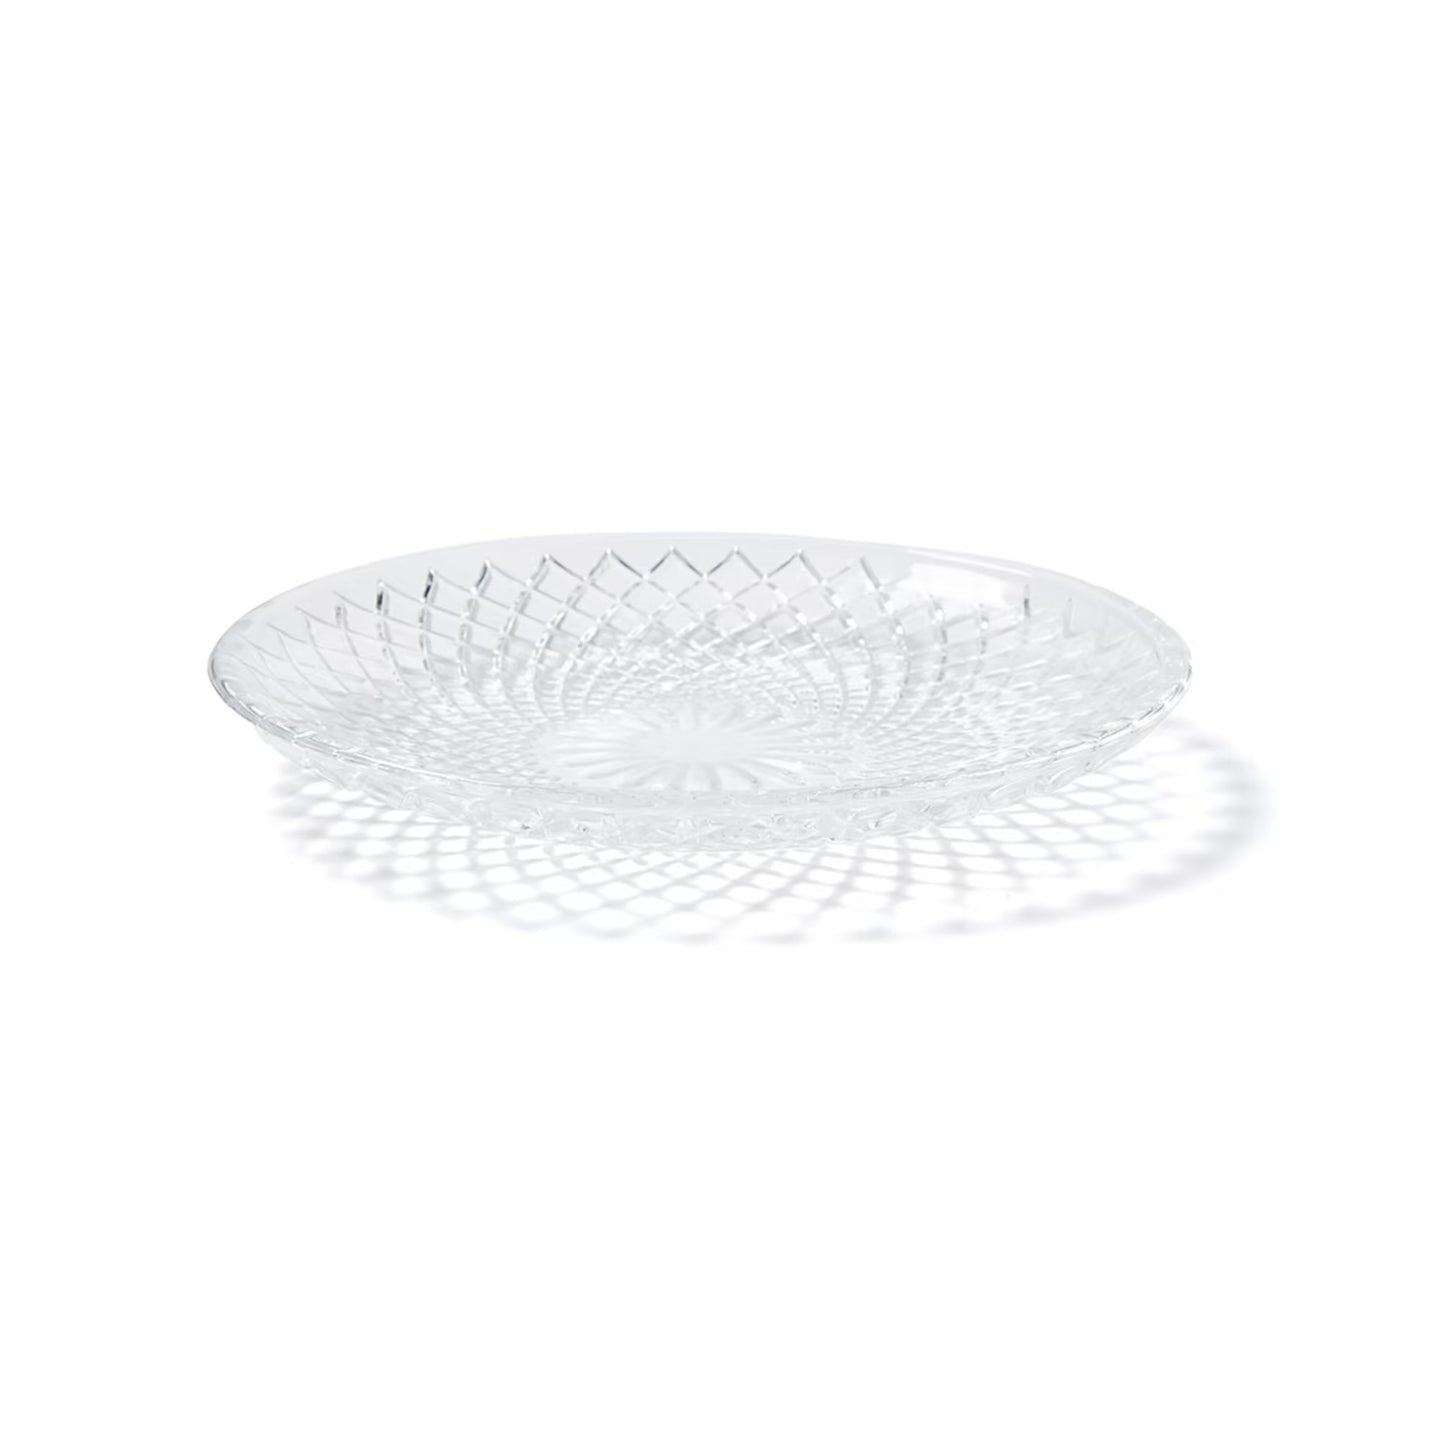 HIRE ZZZ995 - Clear Glass Embossed Entree Plates | 150 Available